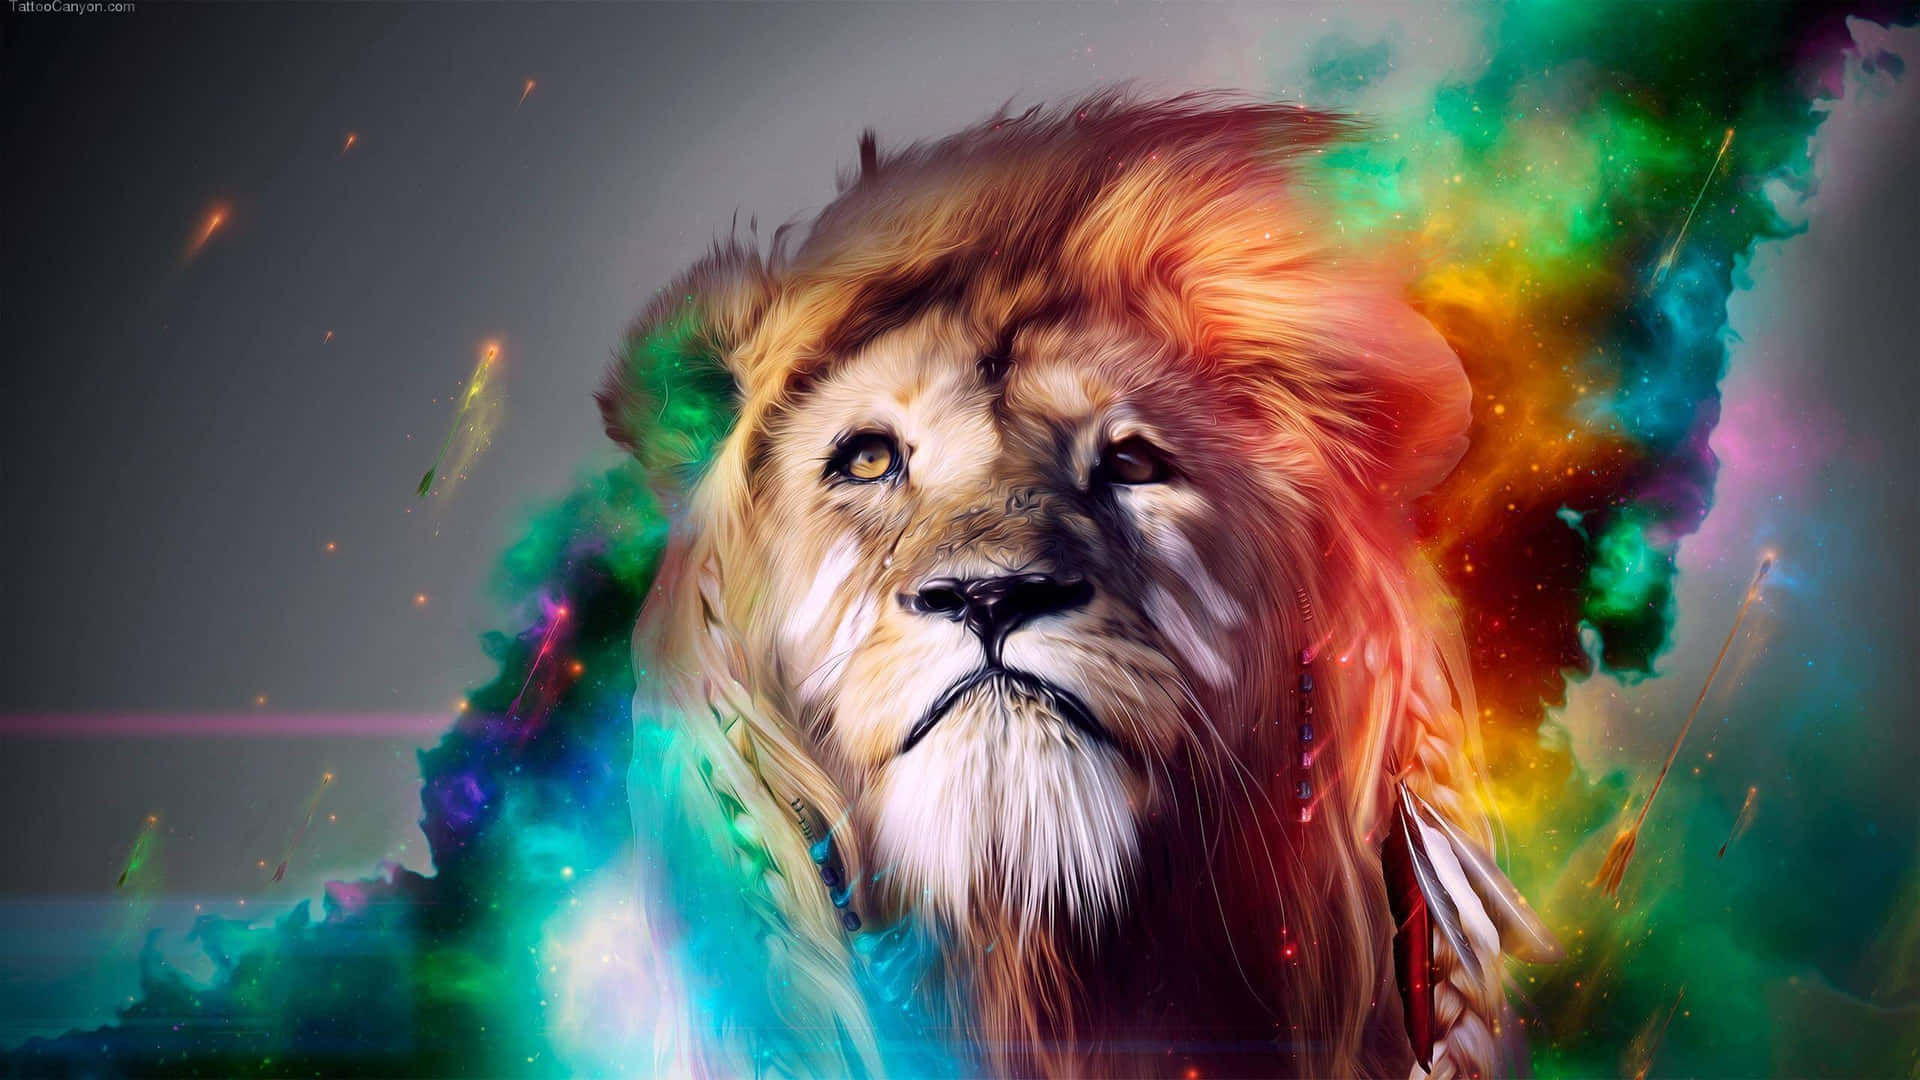 Awesome Multicolored Smoky Lion Picture